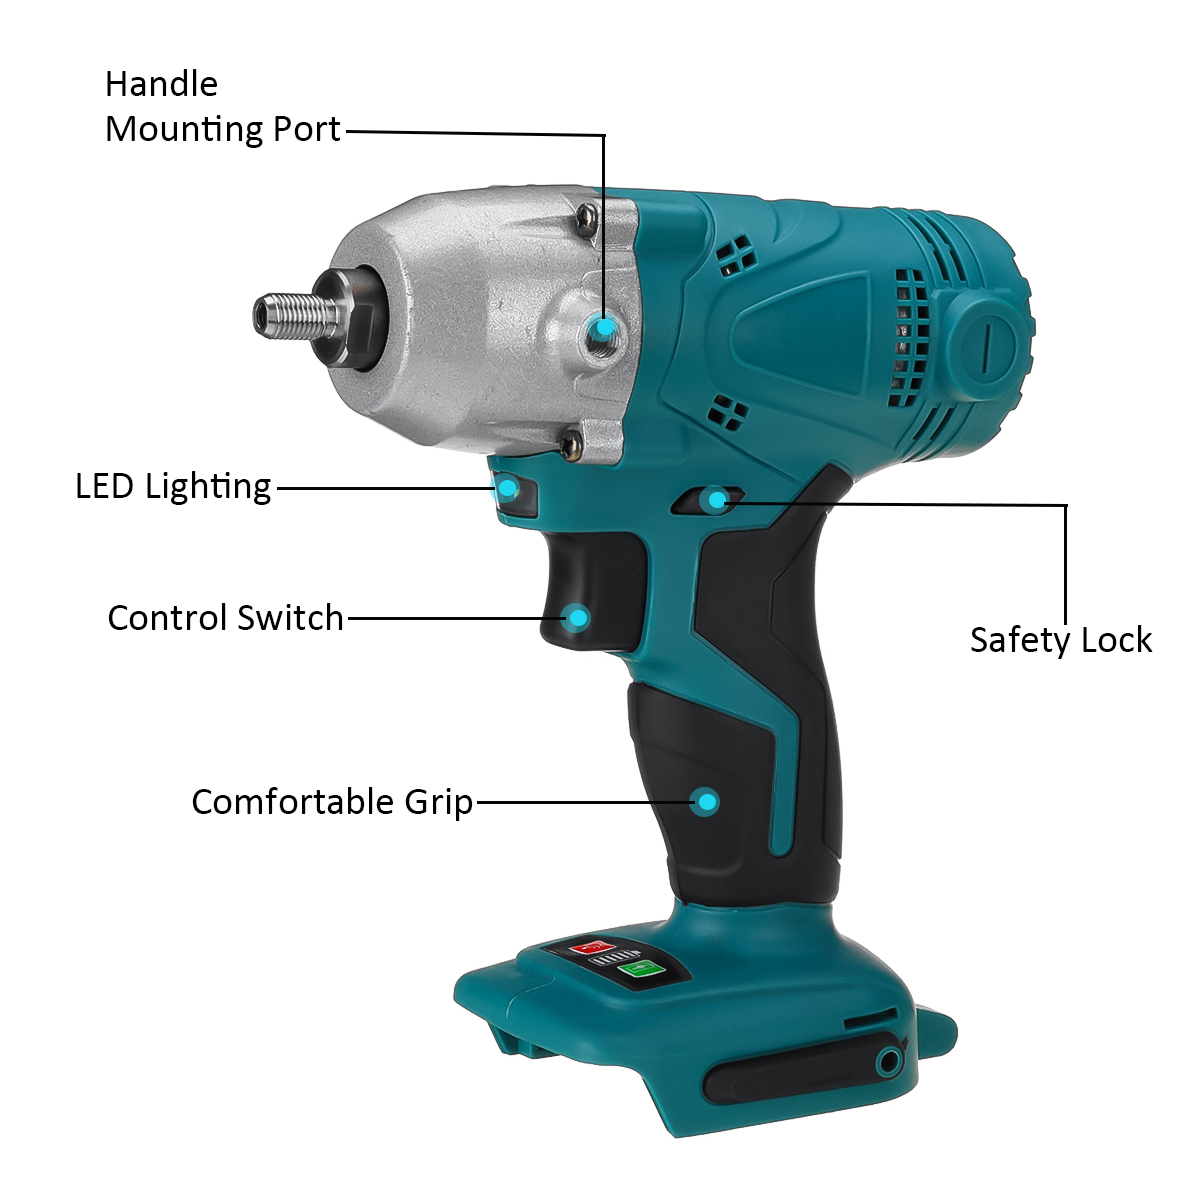 2-In-1-Polisher-Drill-Cordless-Electric-Drilling-Polishing-Machine-Car-Polisher-Power-Tool-Converter-1889909-9